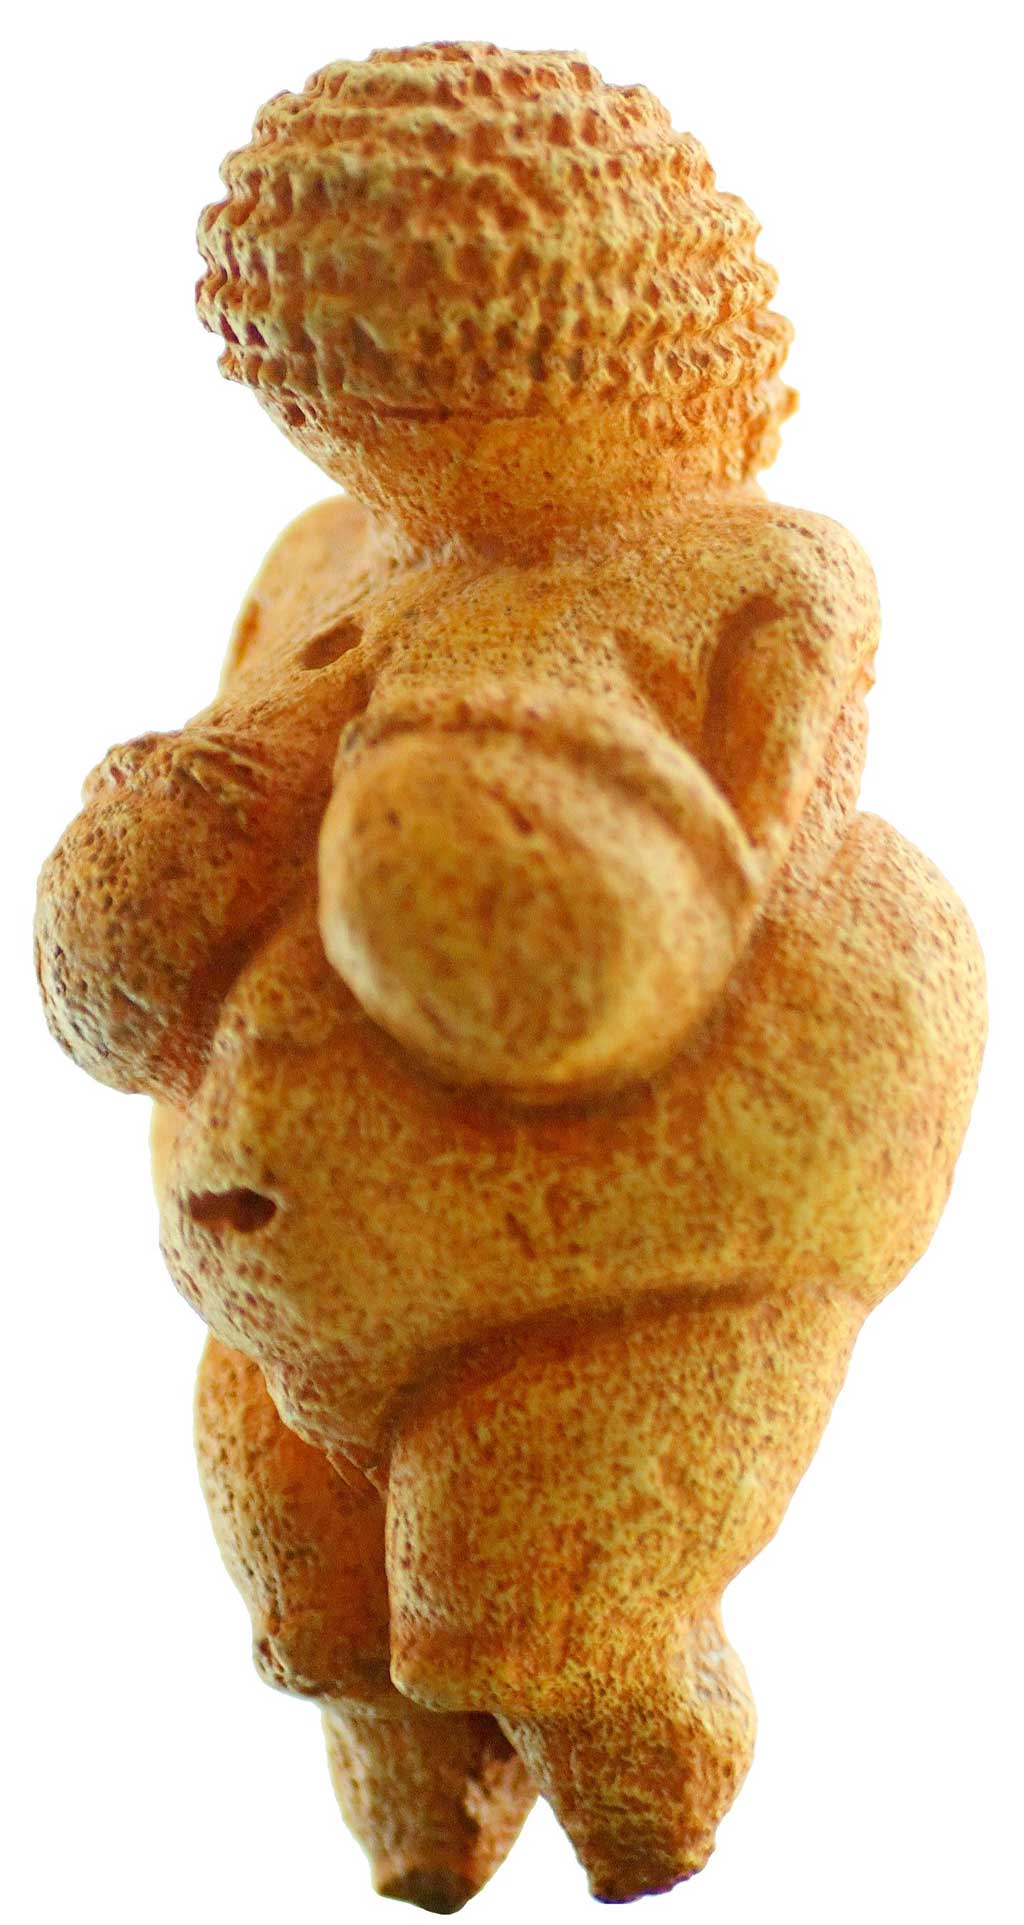 Image of the Venus of Willendorf. The ochre stained statuette included an accentuated bust and pronounced belly to emphasize her heightened fertility. While she is faceless, the carver of the Venus has etched woven hair into the statue.